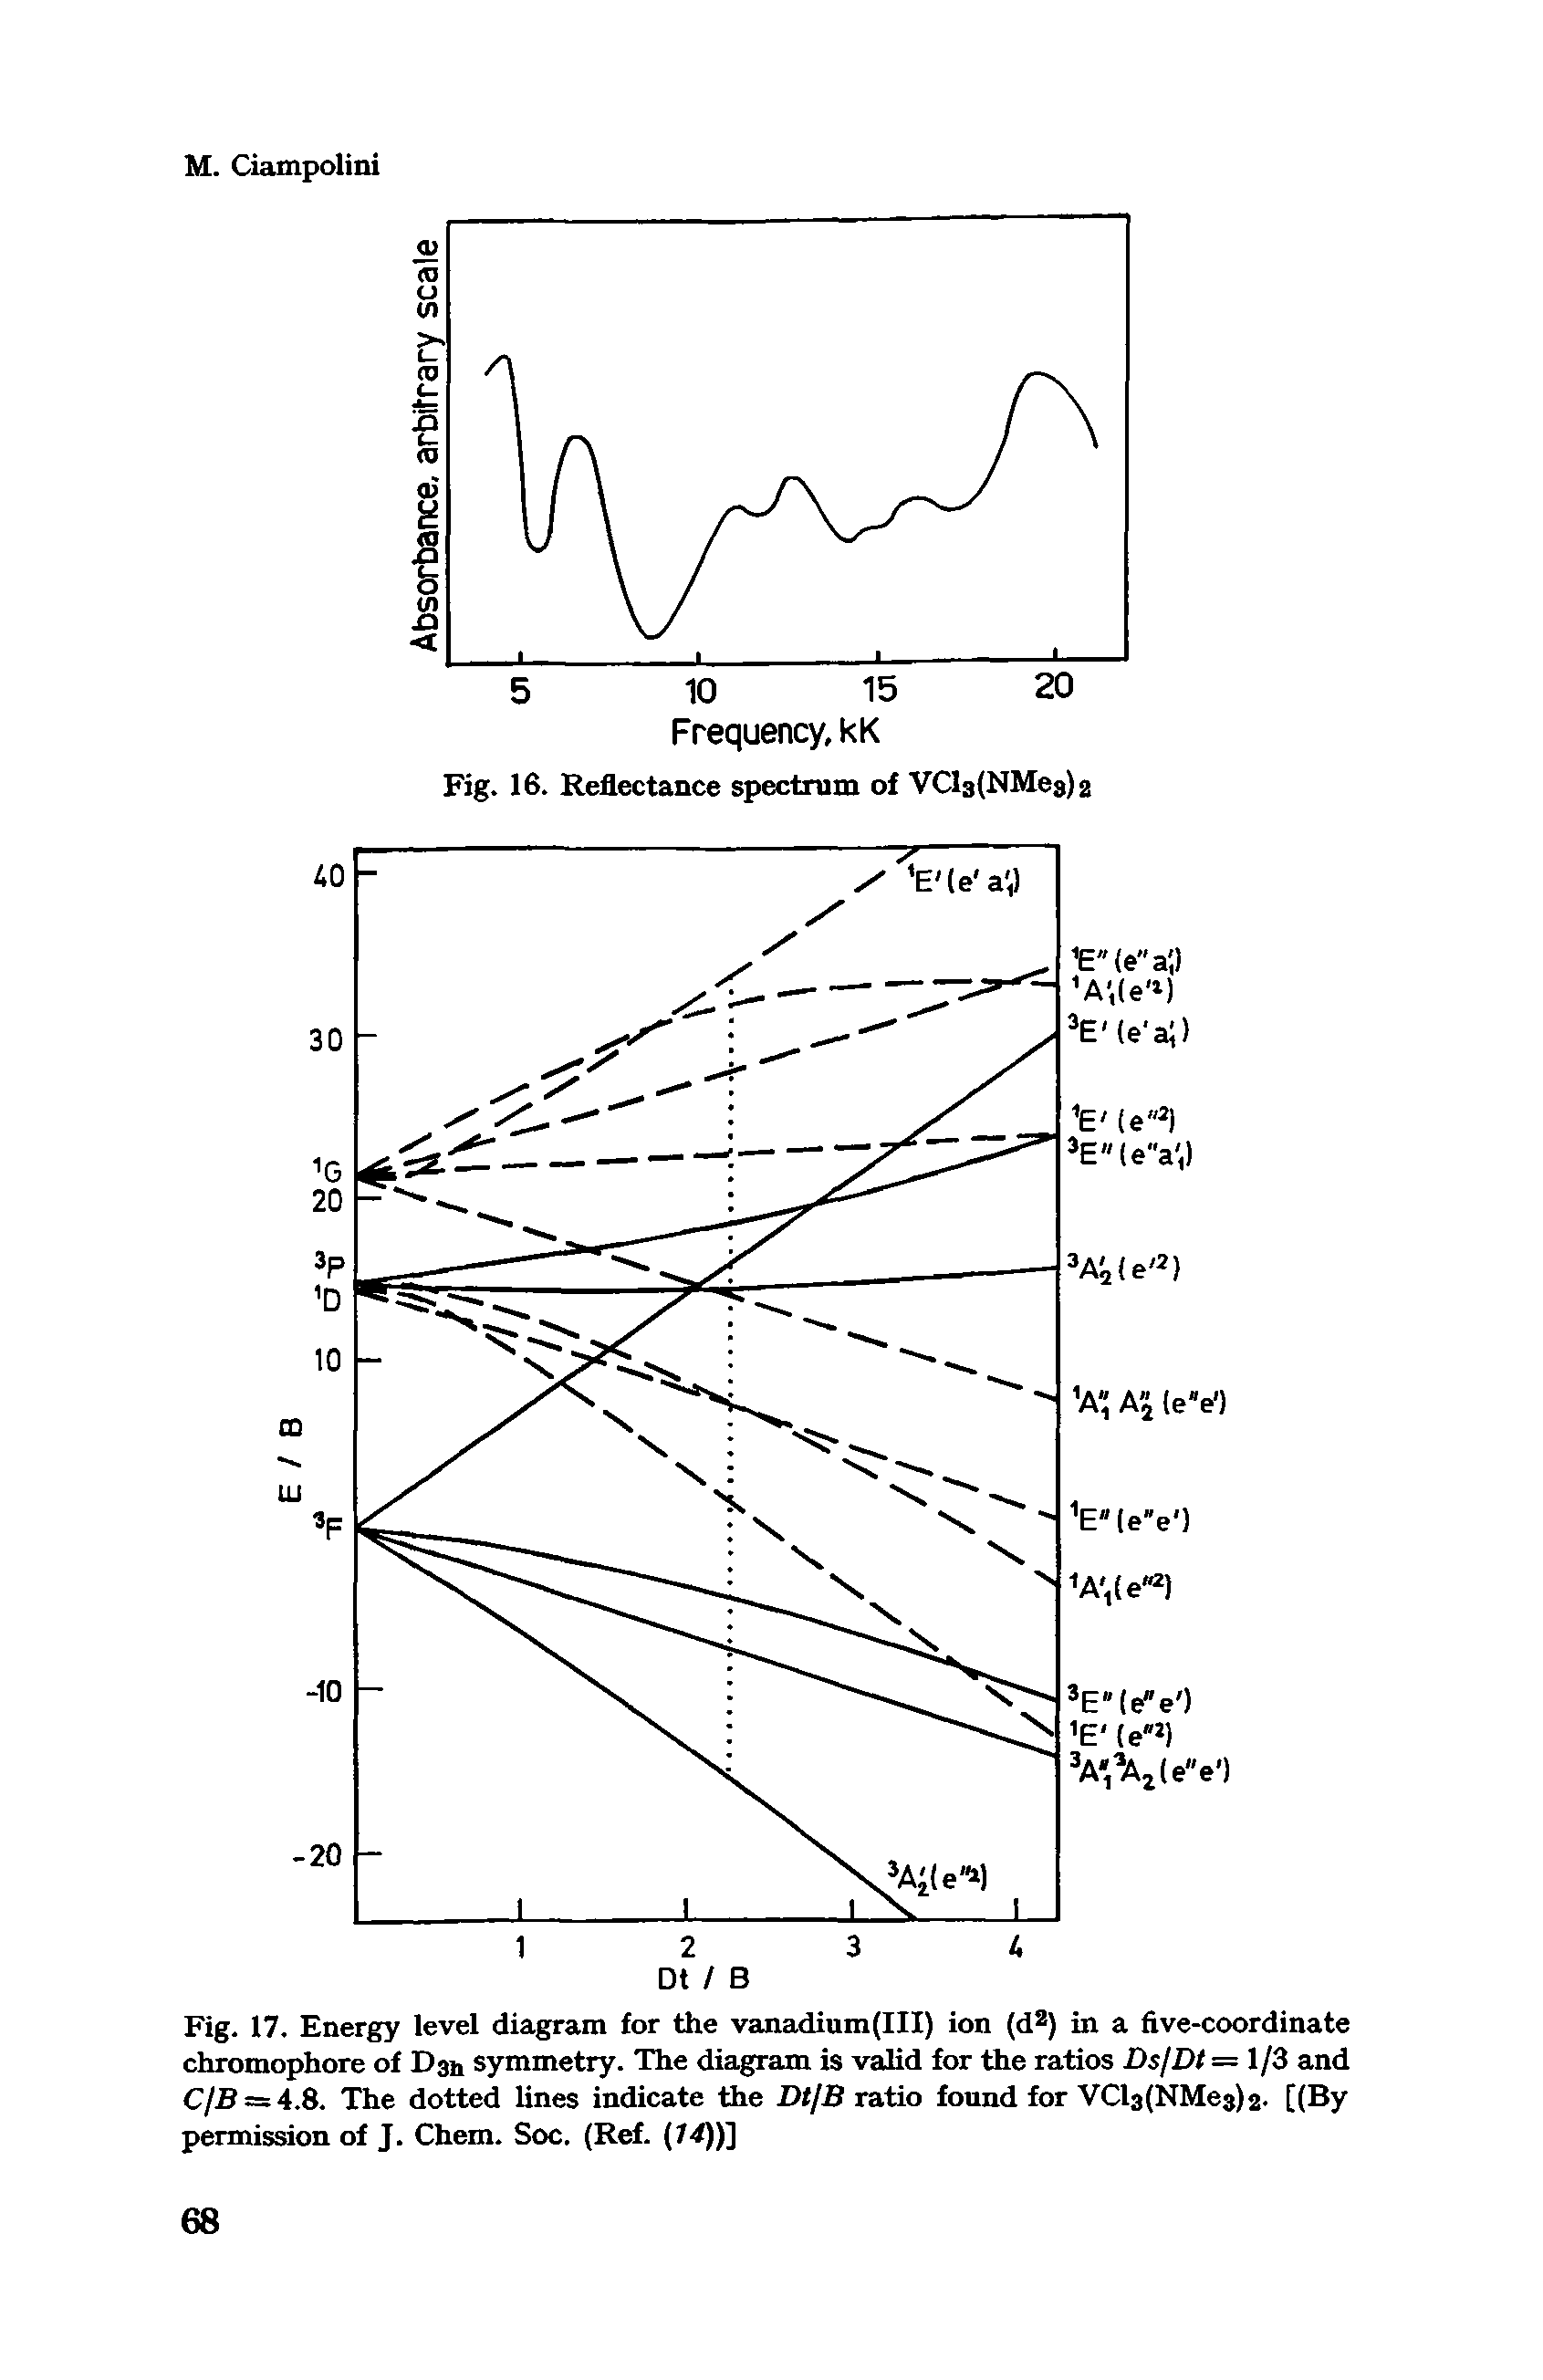 Fig. 17. Energy level diagram for the vanadium(III) ion (d ) in a five-coordinate chromophore of Dan symmetry. The diagram is valid for the ratios DsjDt= 1/3 and CjB — A.S. The dotted lines indicate the DtjB ratio found for VCls(NMe3)2. [(By permission of J. Chem. Soc. (Ref. (14))]...